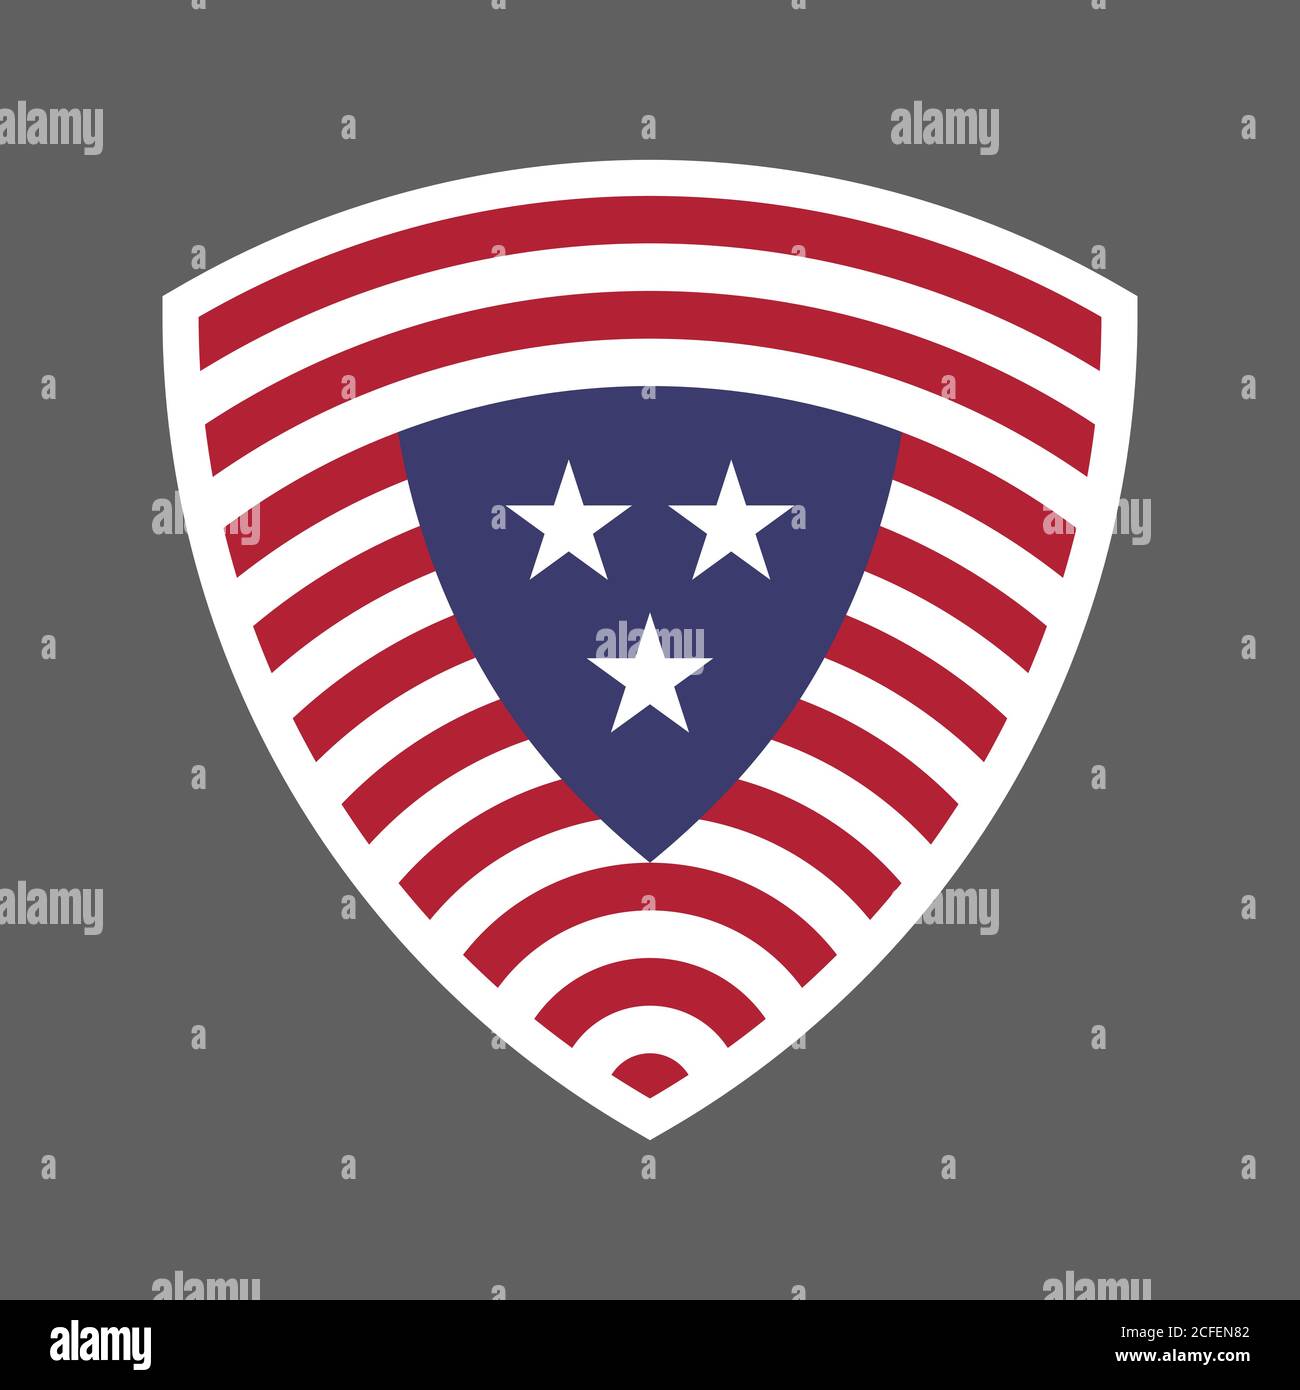 United States of America USA flag shield icon logo vector illustration. Independence Day. 4th of July. Presidential Election Stock Vector